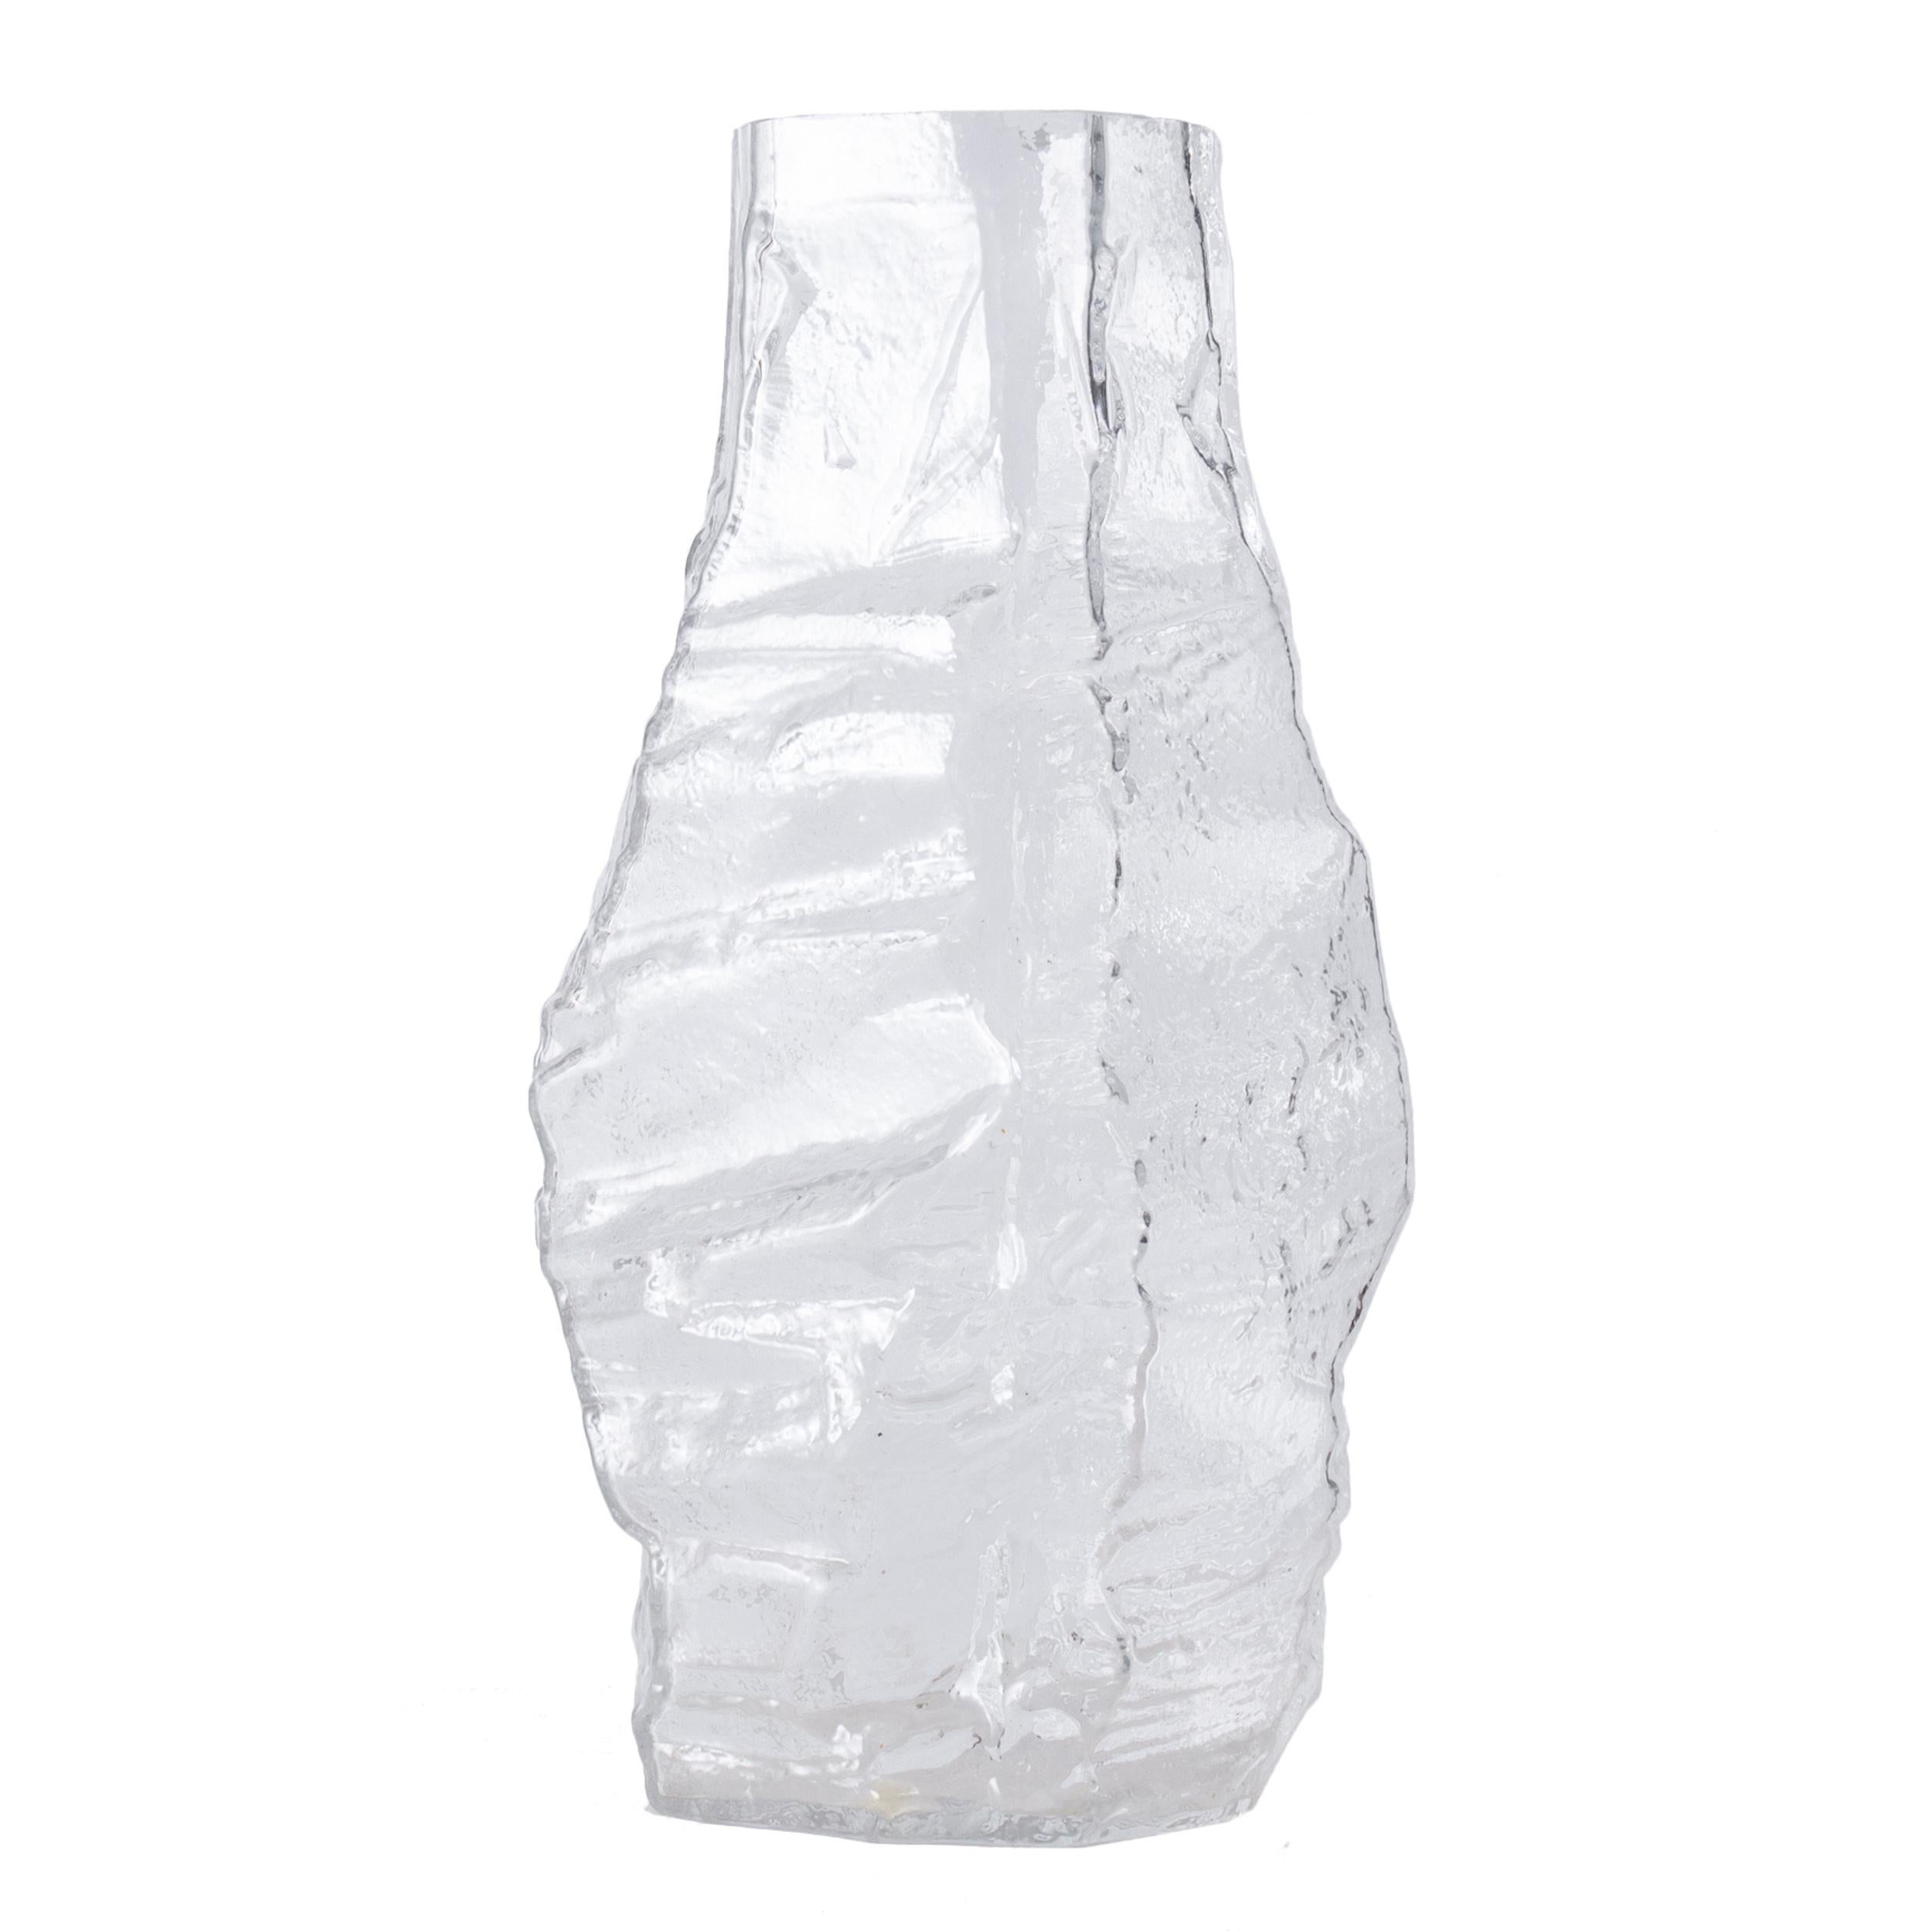 A 1970s large thick and heavy 'glacier' clear glass vase by Peill & Putzler of Germany. 

Measures: Diameter of the top: 12.5 cm, 
Diameter of the base: 17 cm.

In excellent vintage condition.

Dimensions: Depth: 0mm; Width: 0mm; Height: